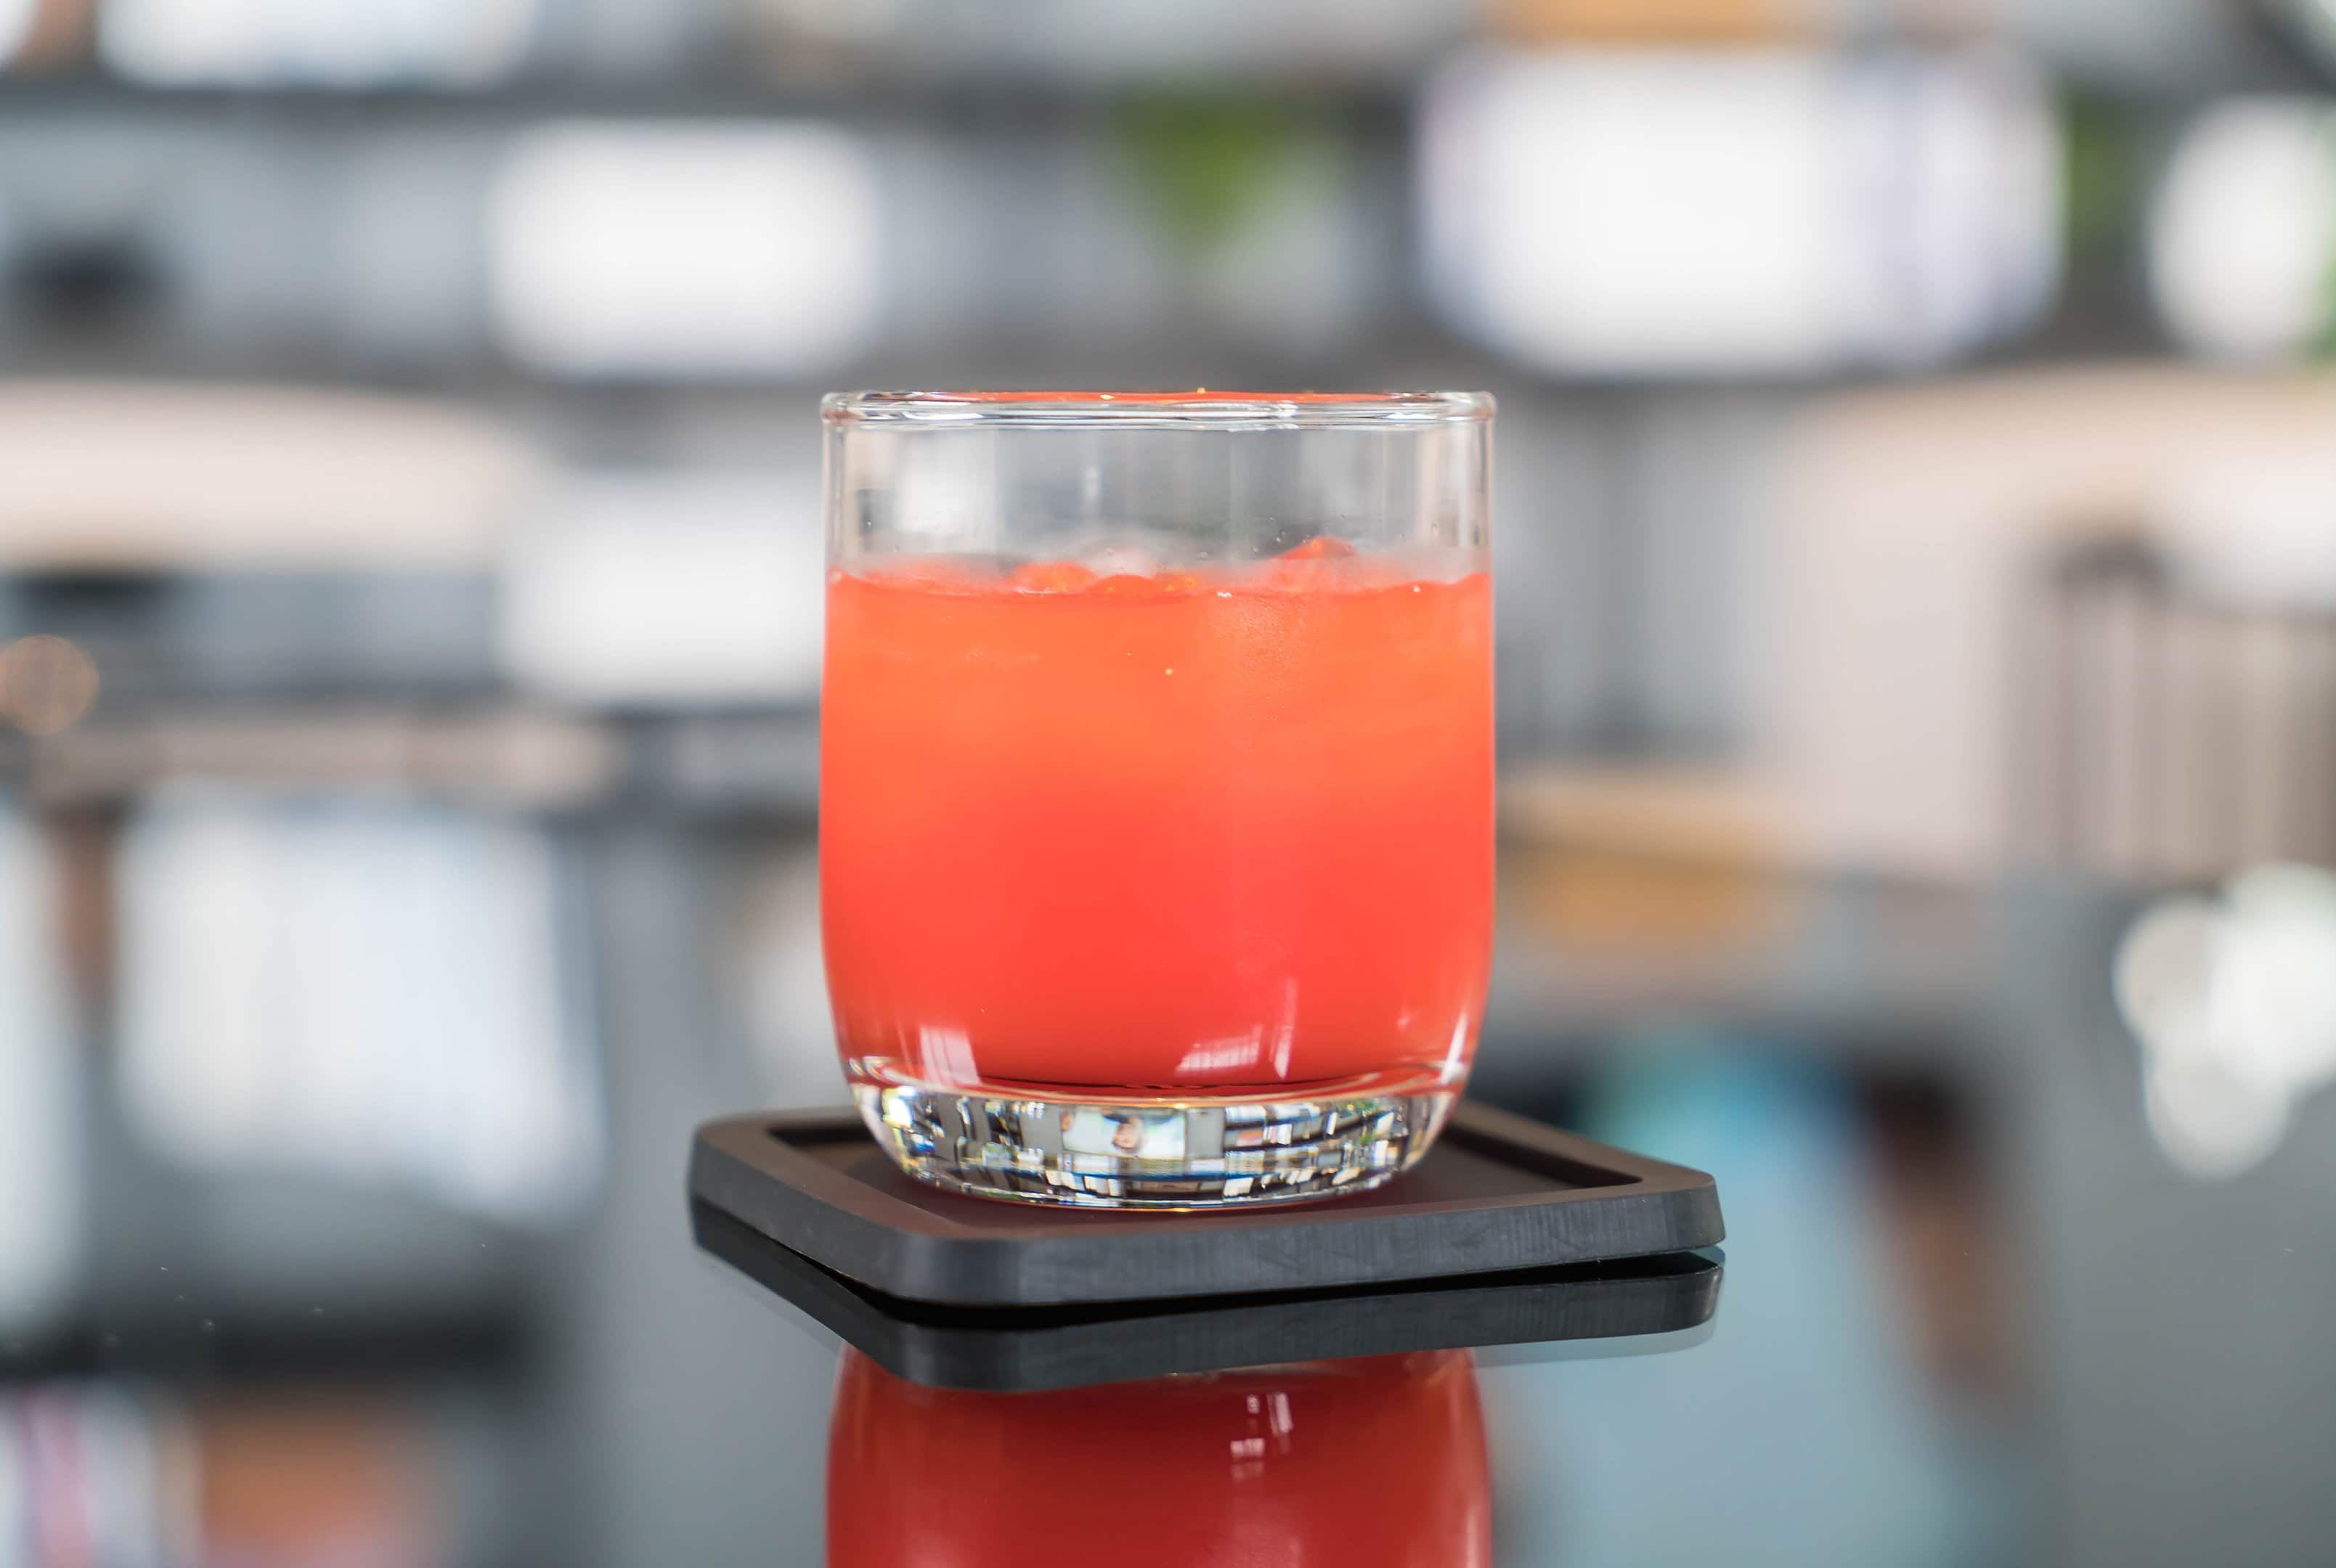 A glass of our Hunch Punch recipe cocktail